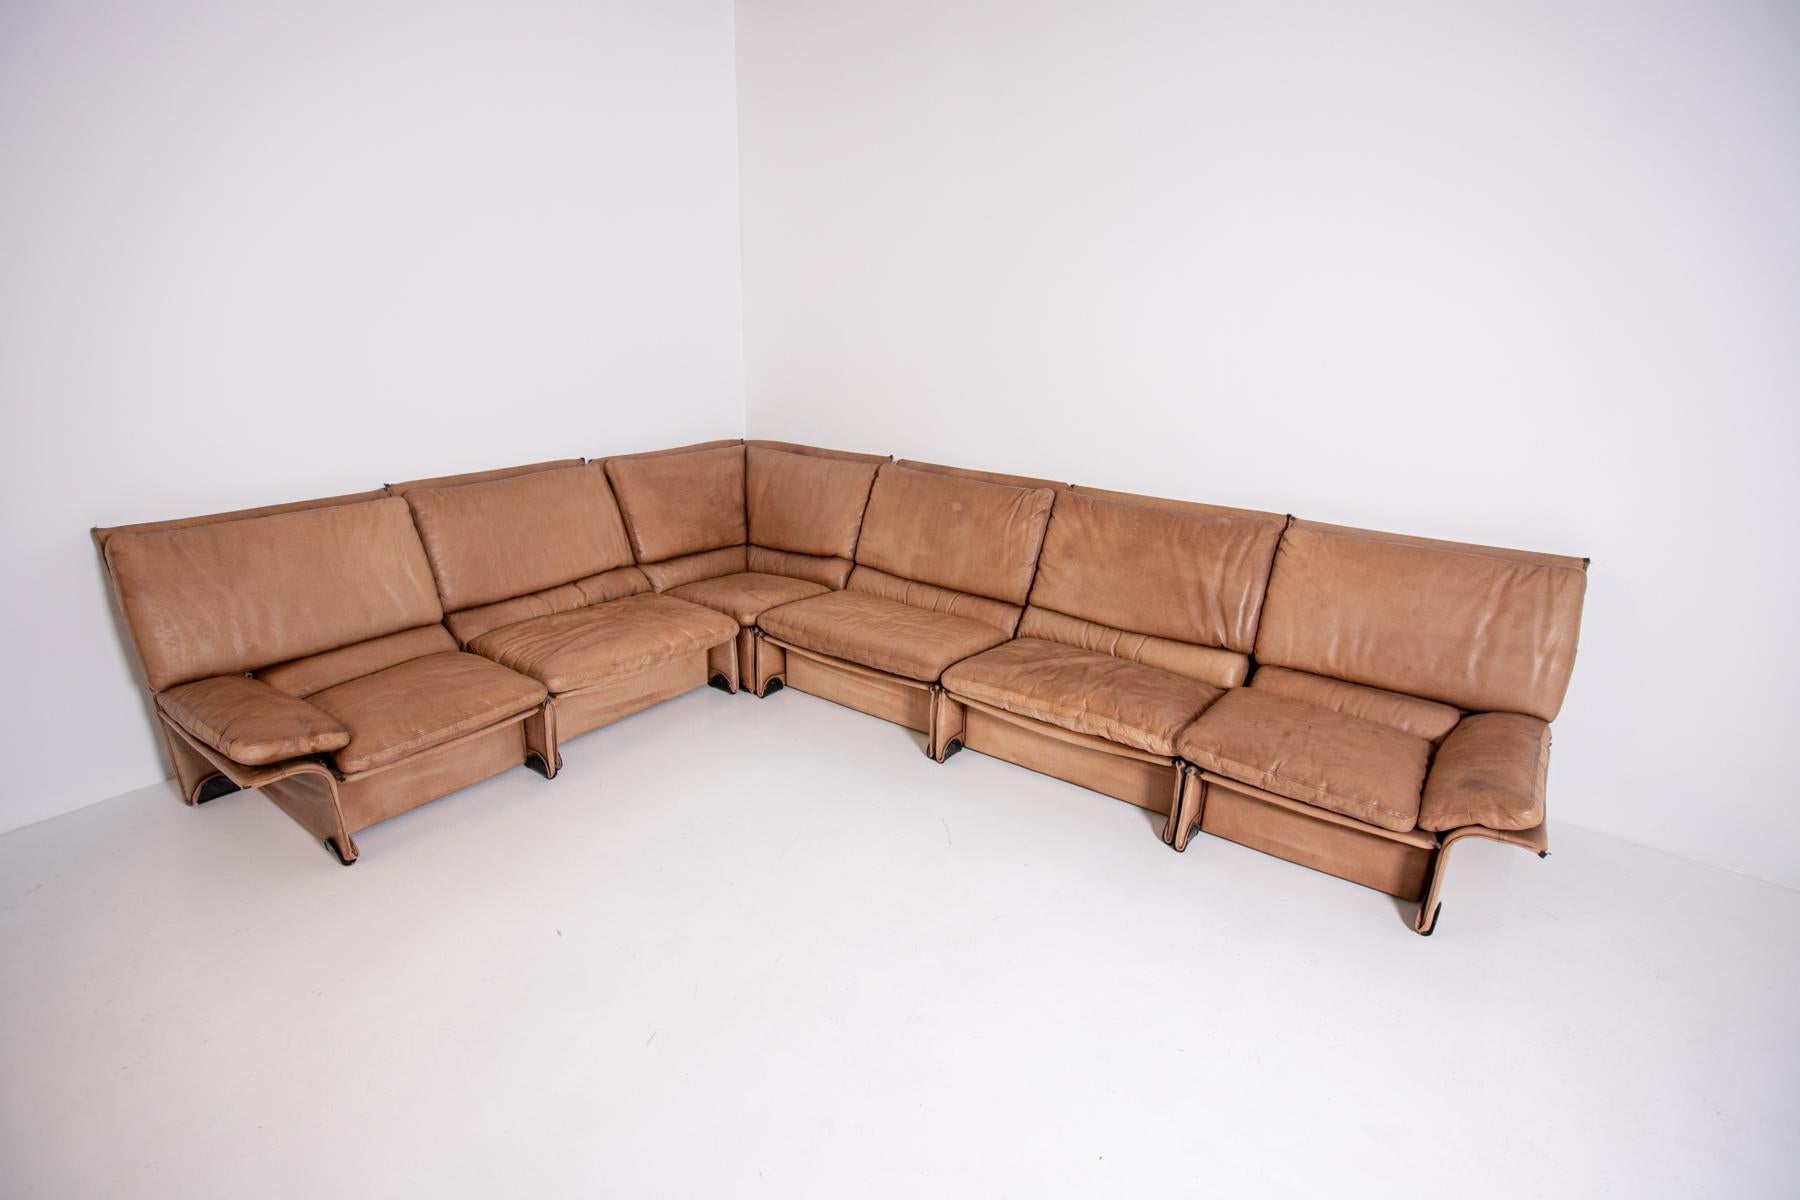 Sofa and 6-piece set of armchairs by Titina Ammanati, Giampiero Vitelli for Brunati, 1976. The armchairs have a metal frame with leather upholstery.
Marked 'Brunati Italia' in the foot at the bottom of each seat. The particularity of the set is in